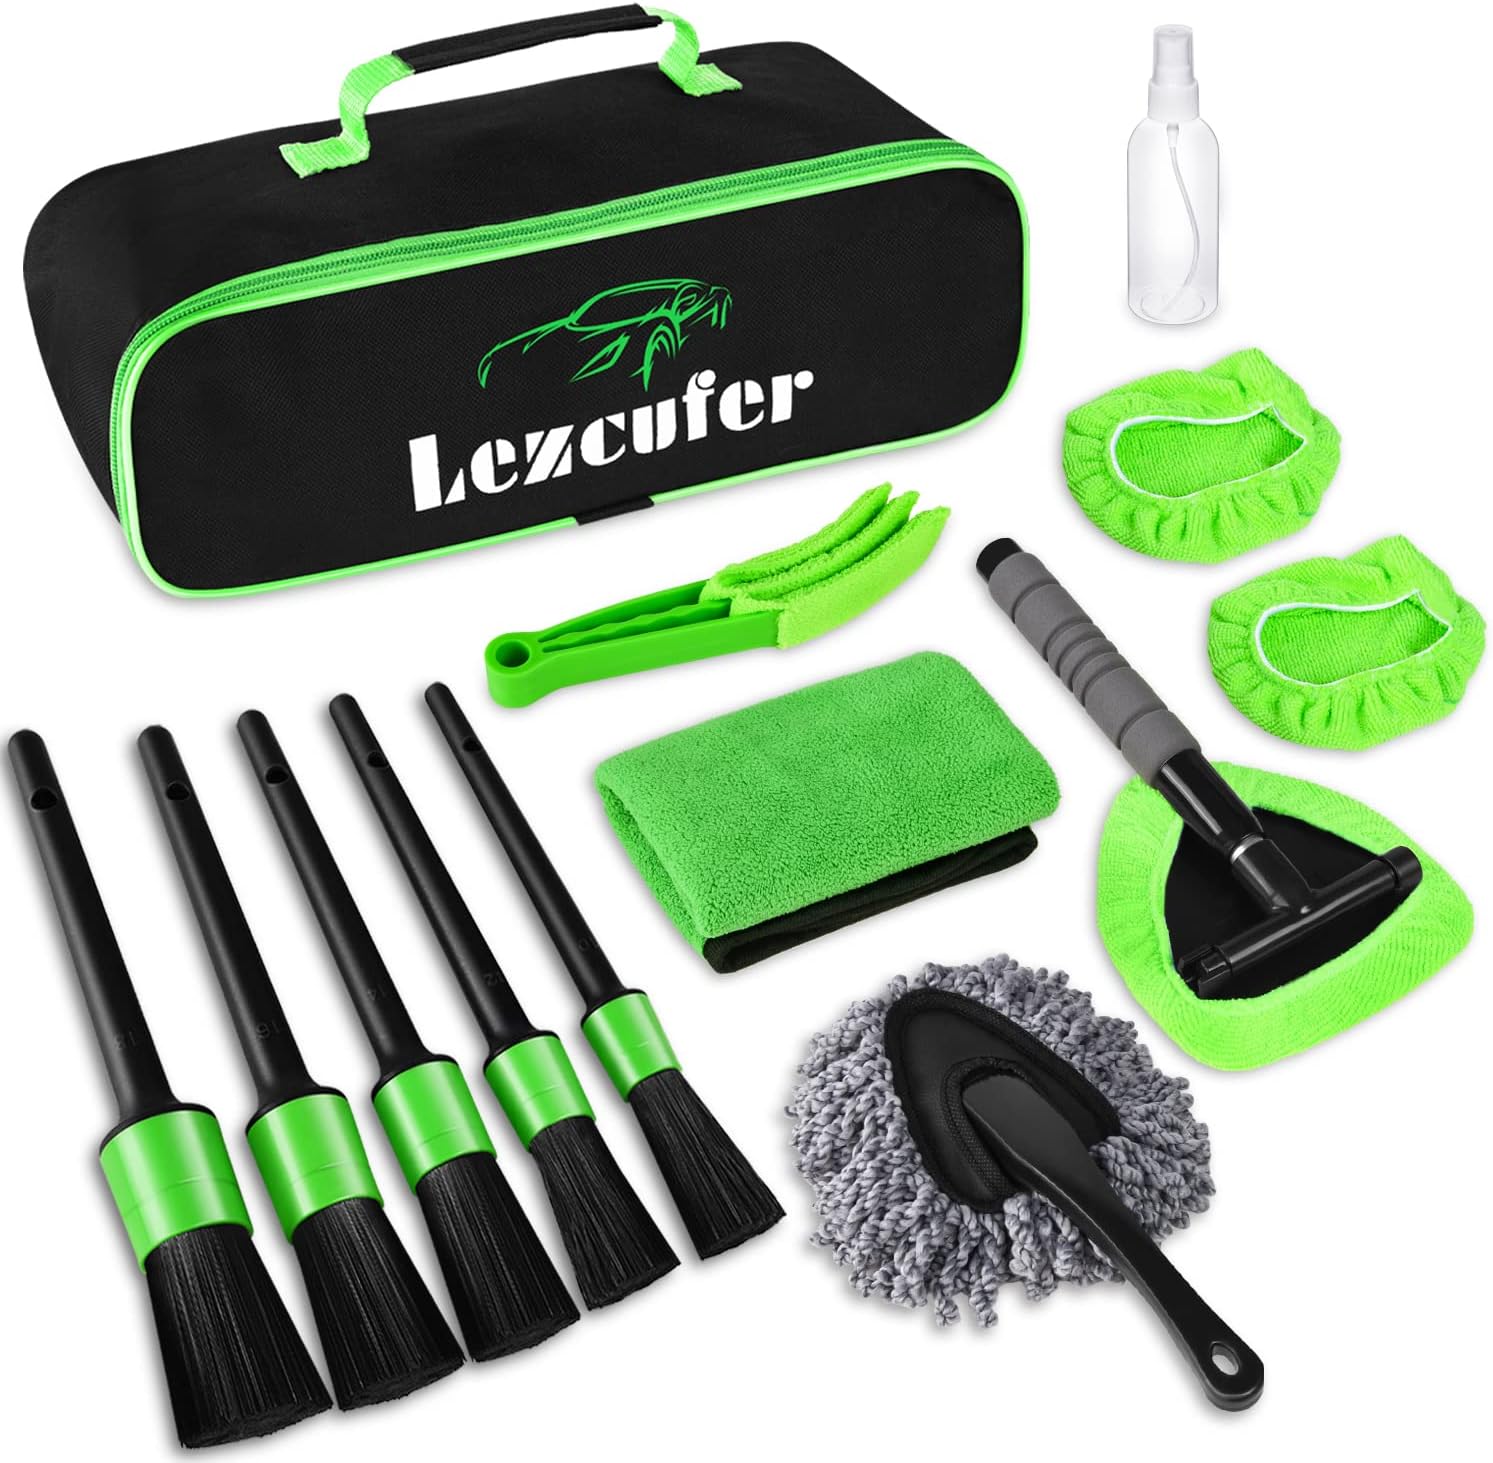 Lezcufer Car Interior Detailing Kit with Windshield Cleaning Tool, Car Detailing Brush Kit,Car Duster Interior Kit,Car Interior Cleaning